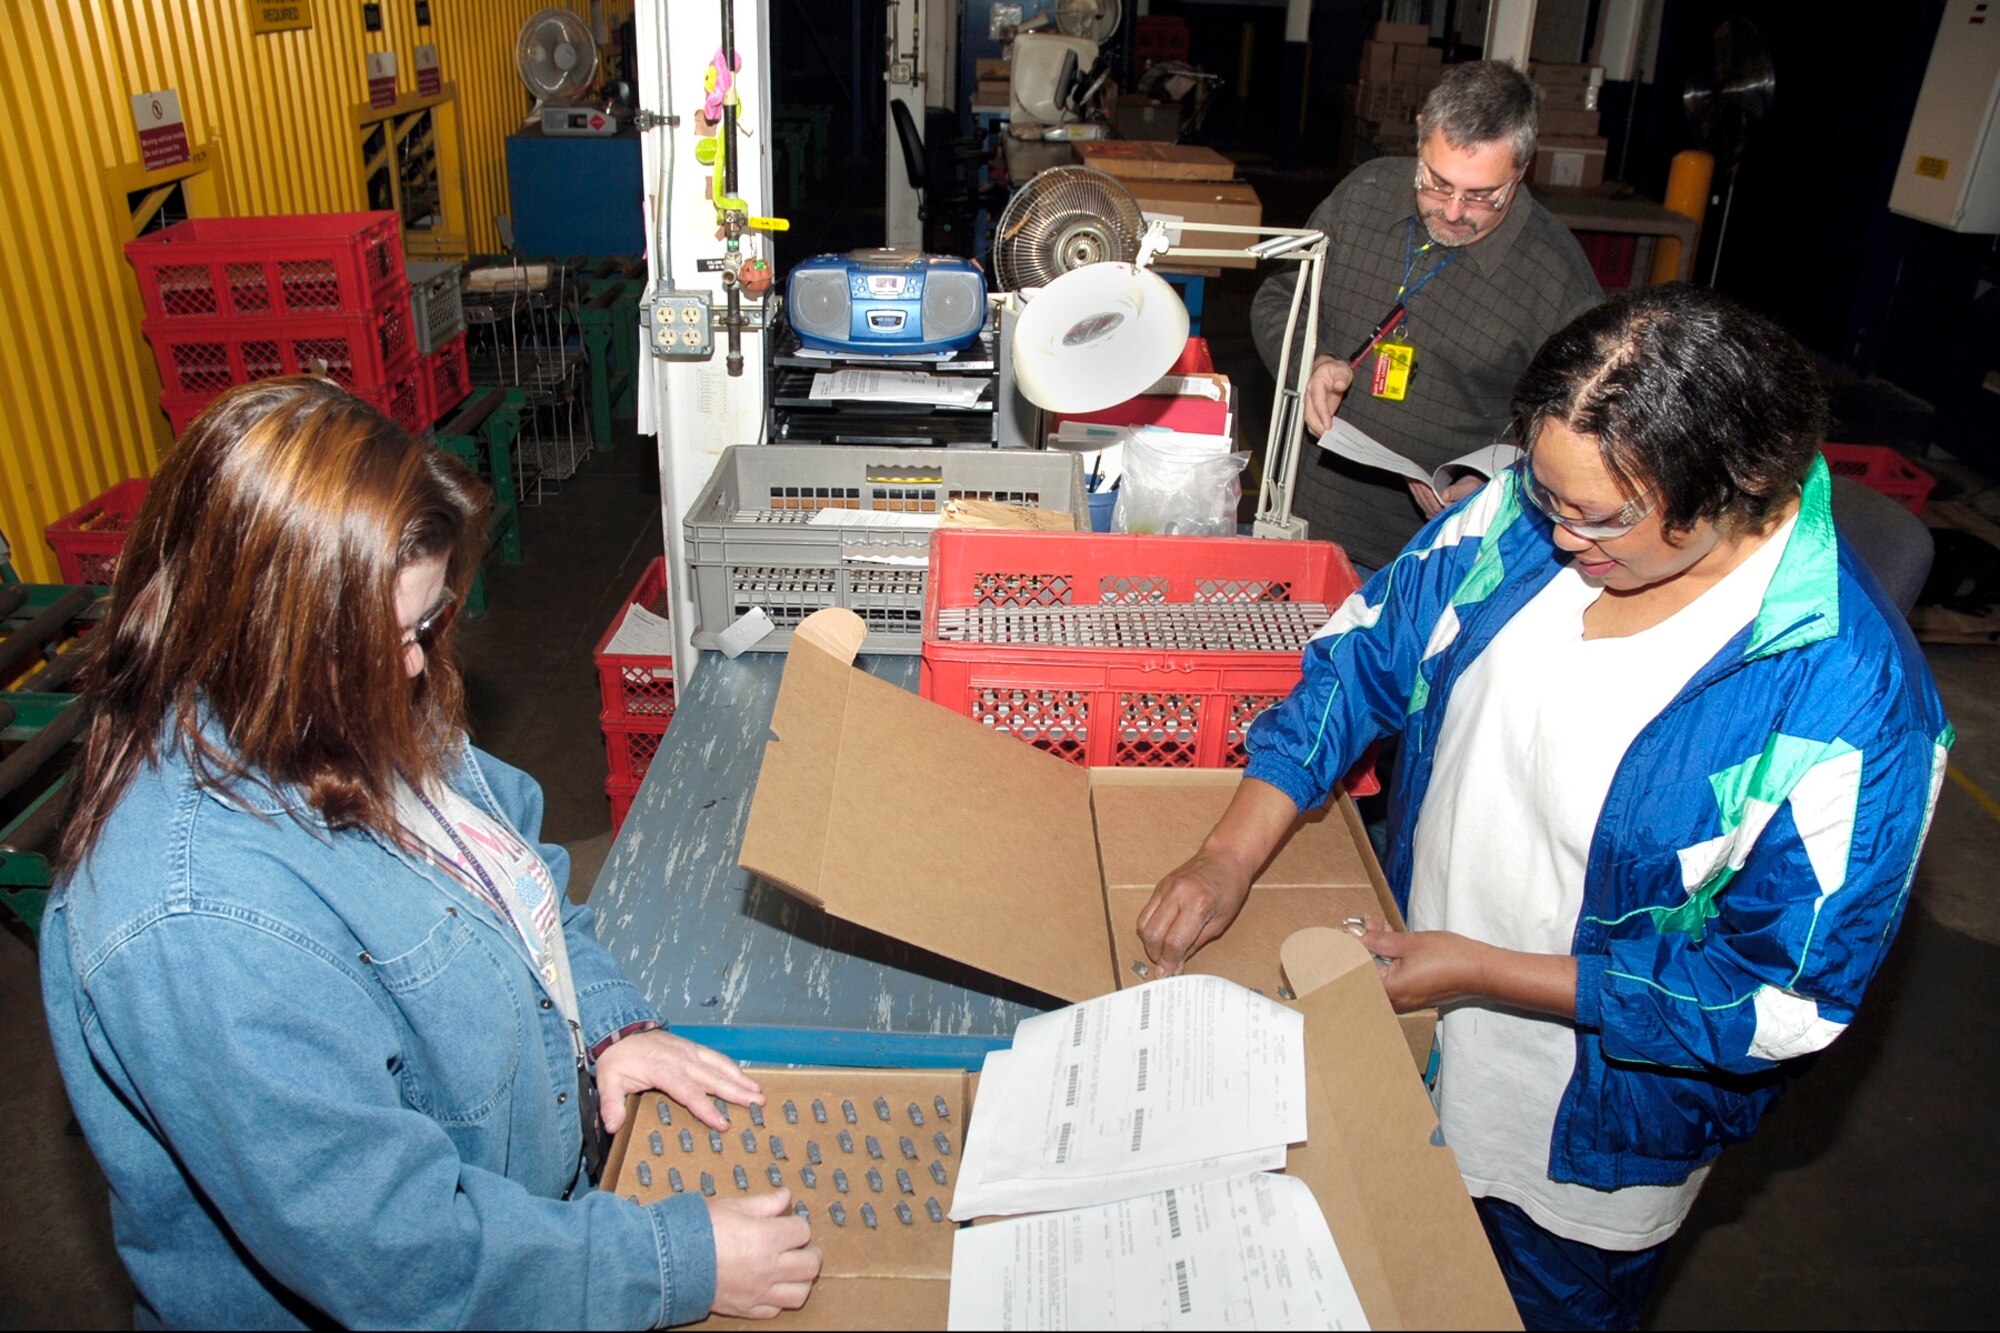 Gary Richards, Clara Norwood, right, and Verla Brown assemble parts in the F100 weigh-in area for compressor blade kits. (Air Force photo/Kelly White)